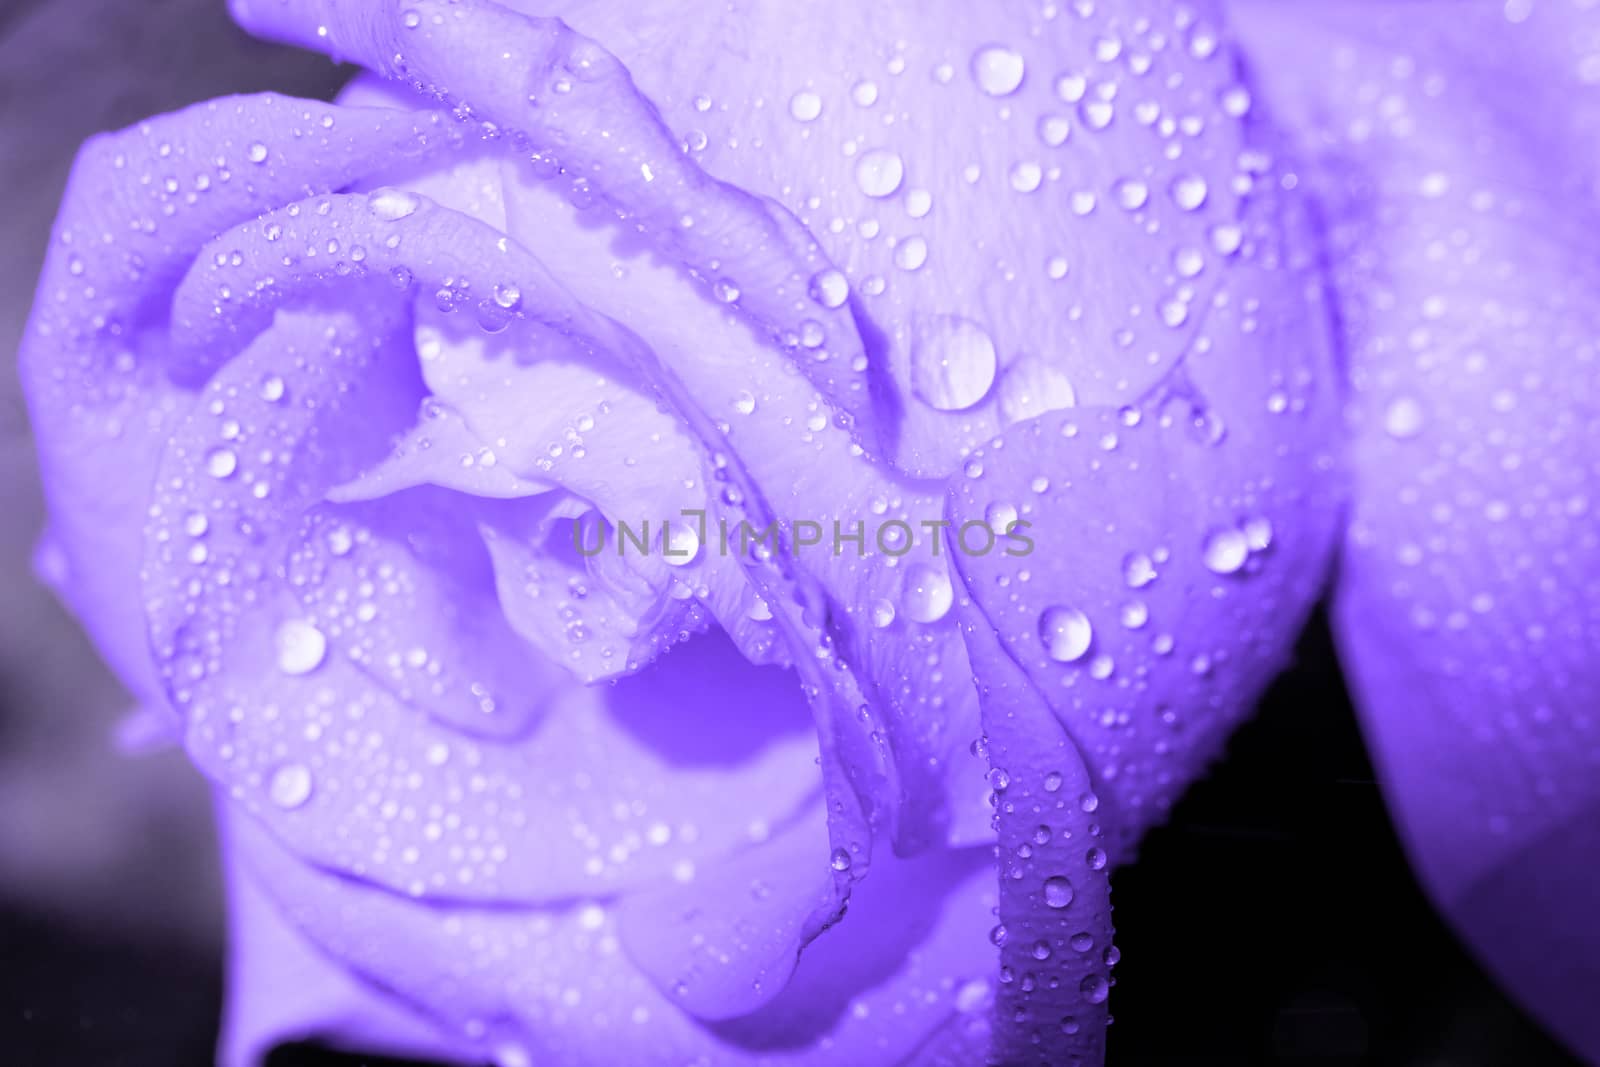 Water drops by Nneirda